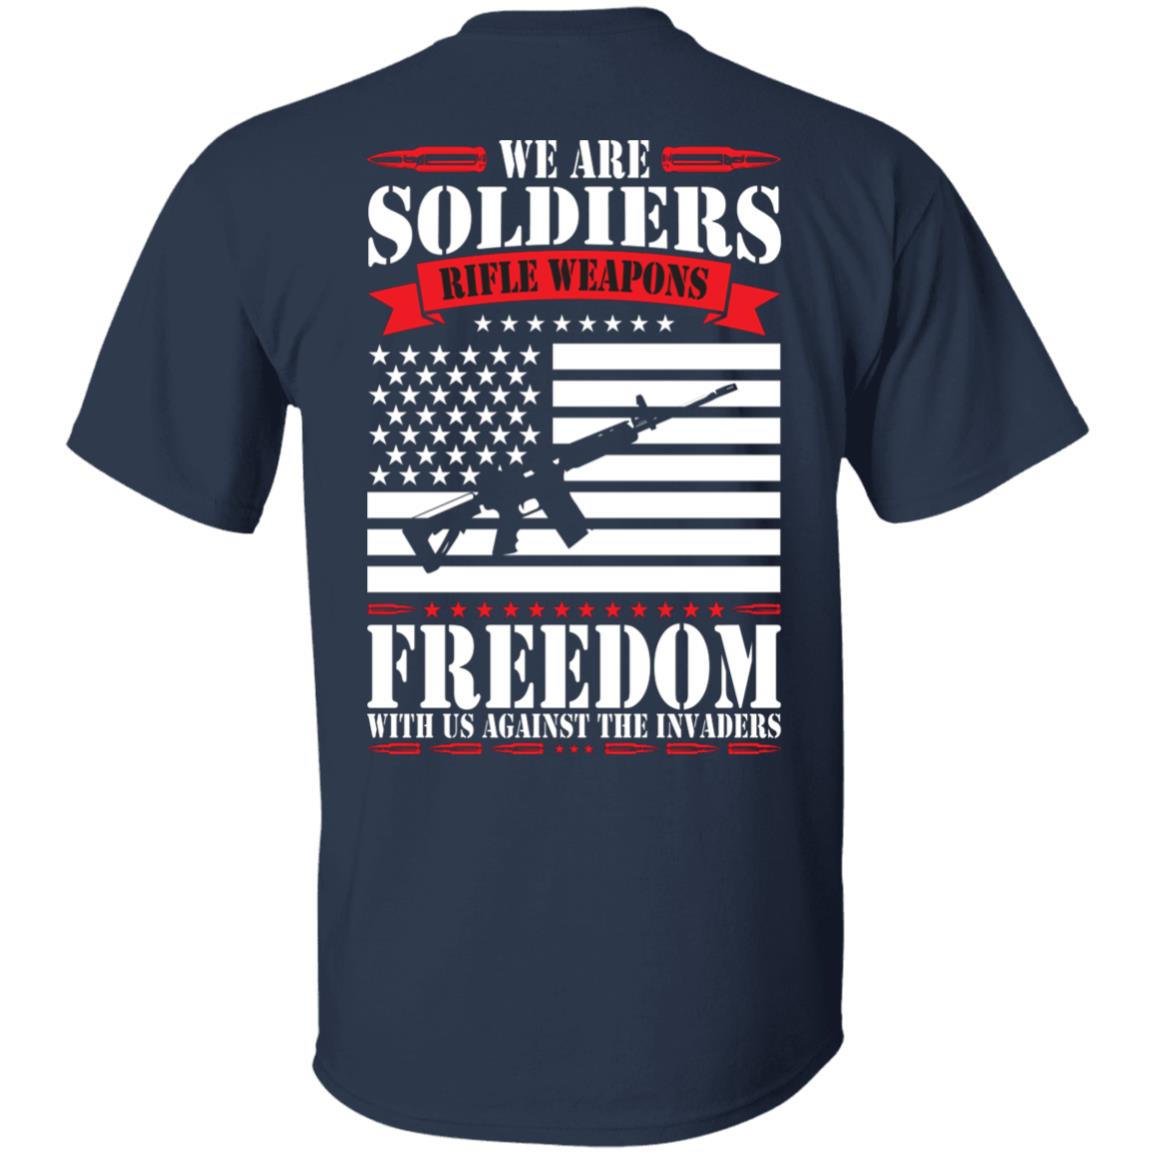 We Are Soldiers Rifle Weapons US Flag Shirt